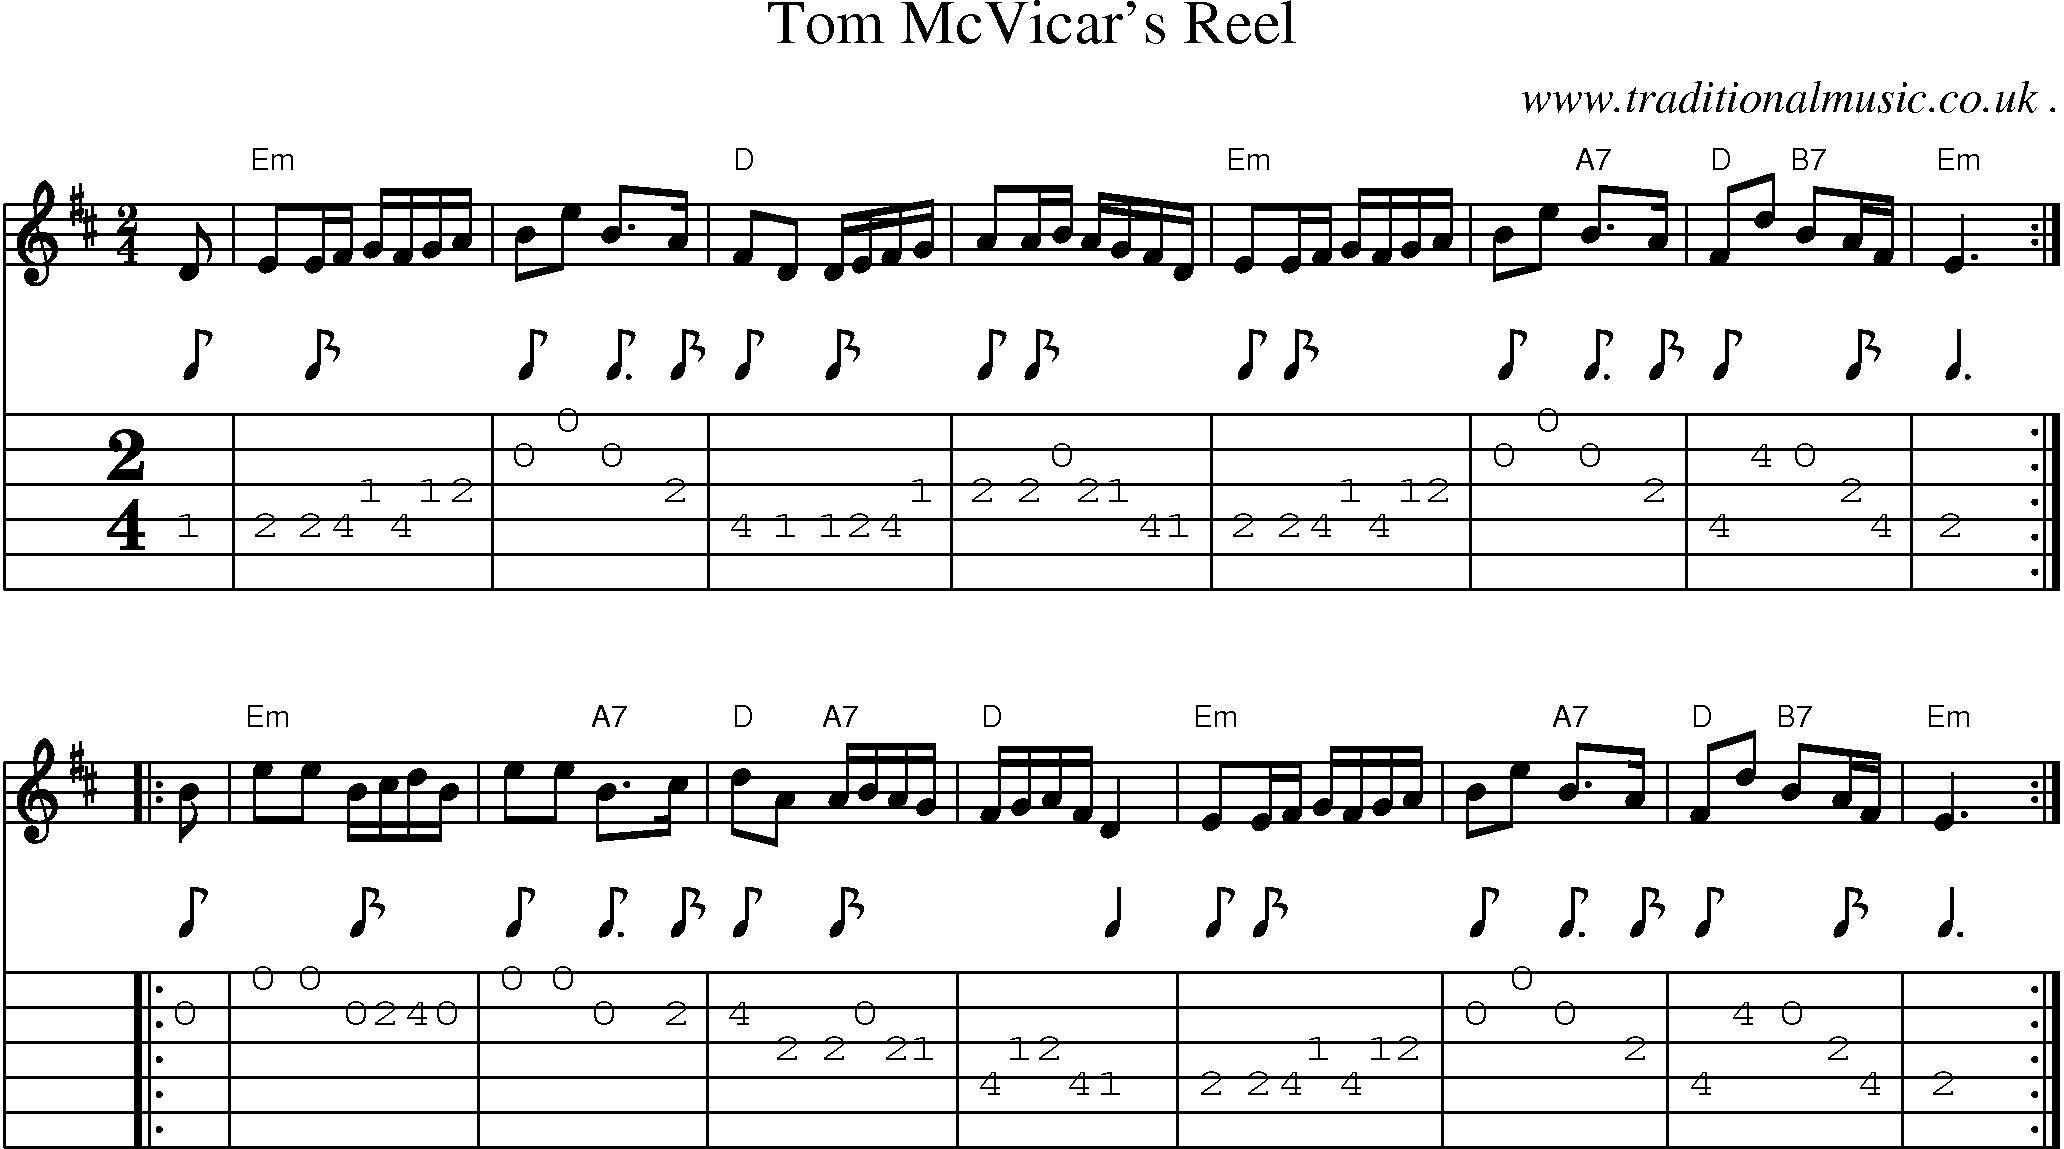 Sheet-music  score, Chords and Guitar Tabs for Tom Mcvicars Reel1